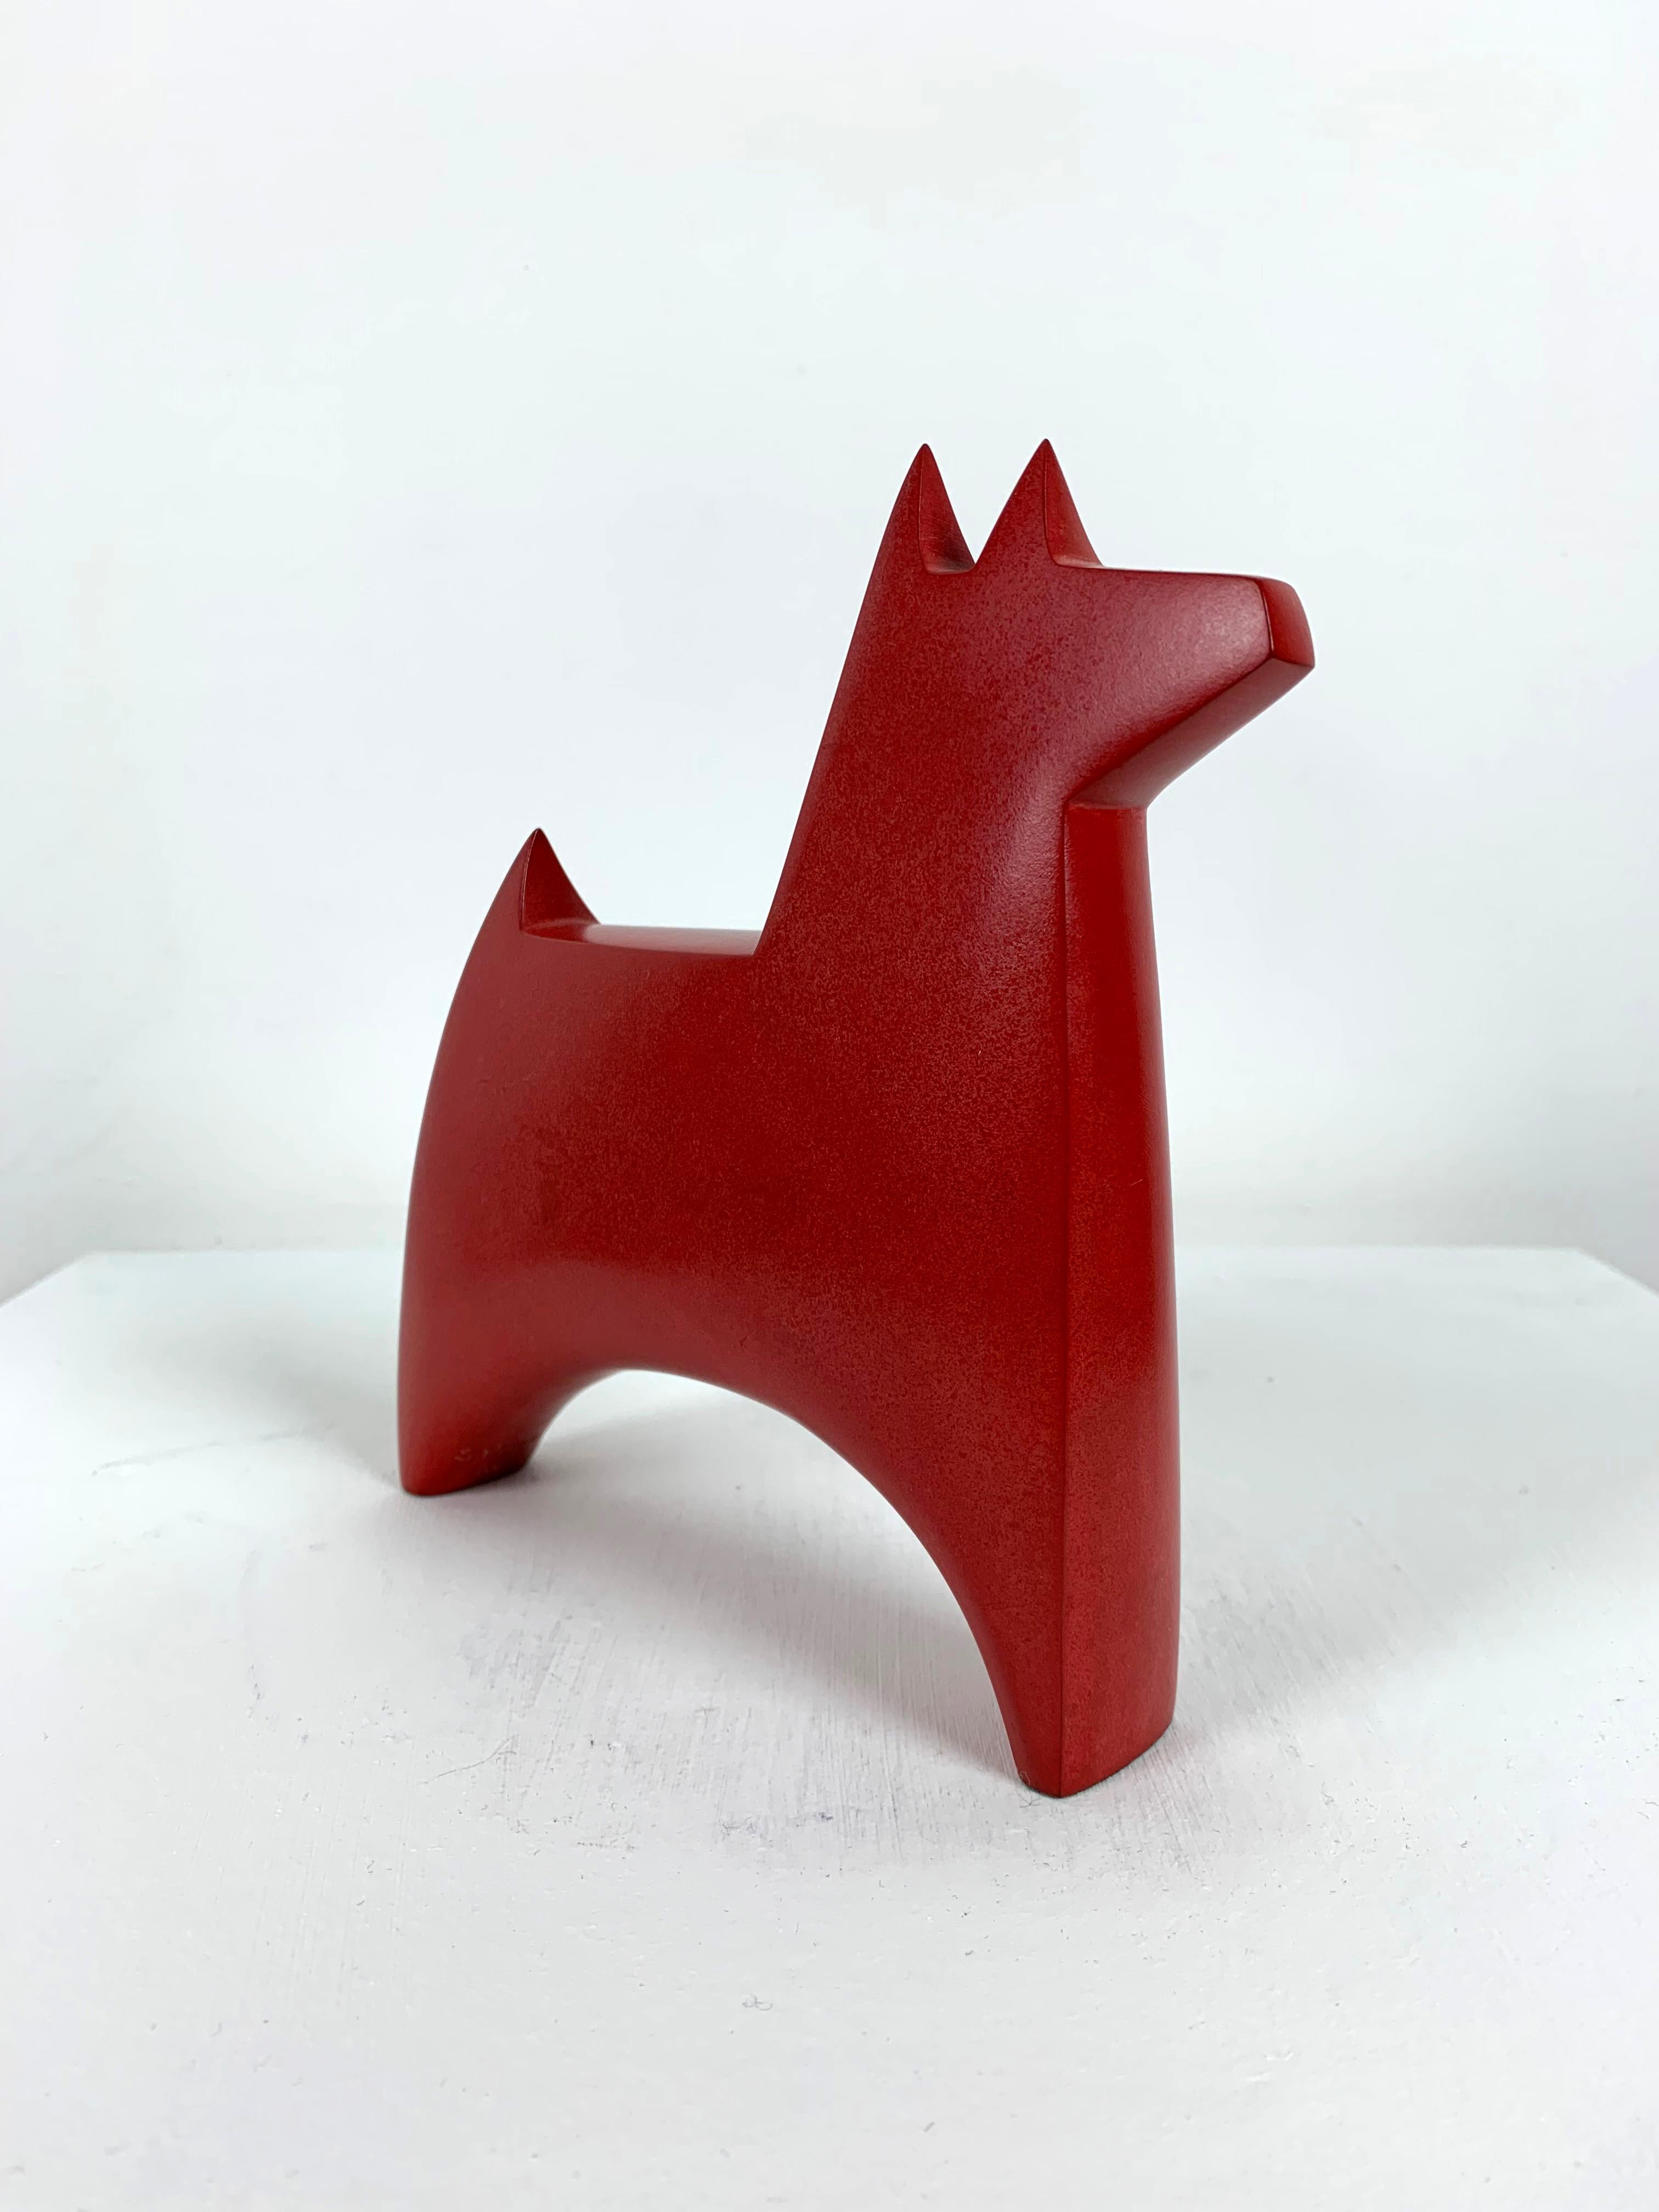 Dogstar - Contemporary Sculpture by Stephen Page